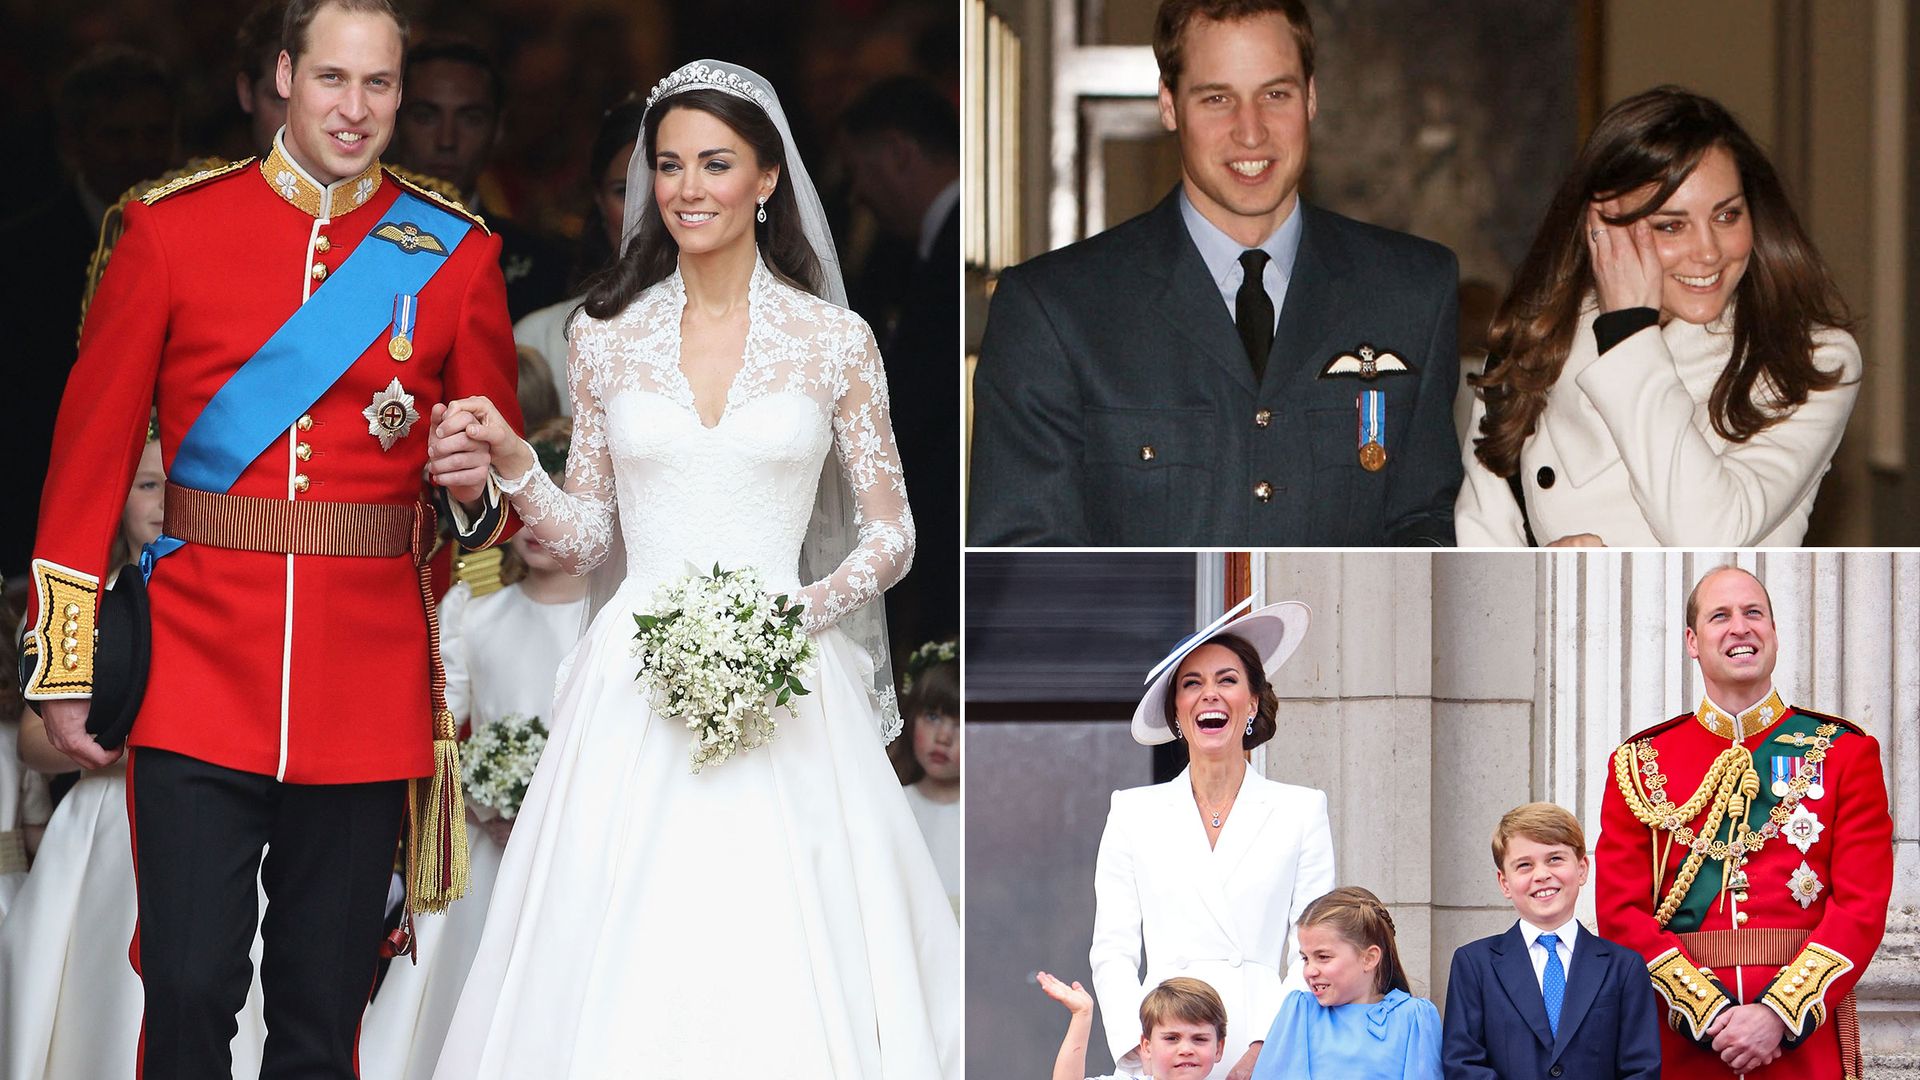 Prince William and Princess Kate's full relationship timeline - from uni students to family